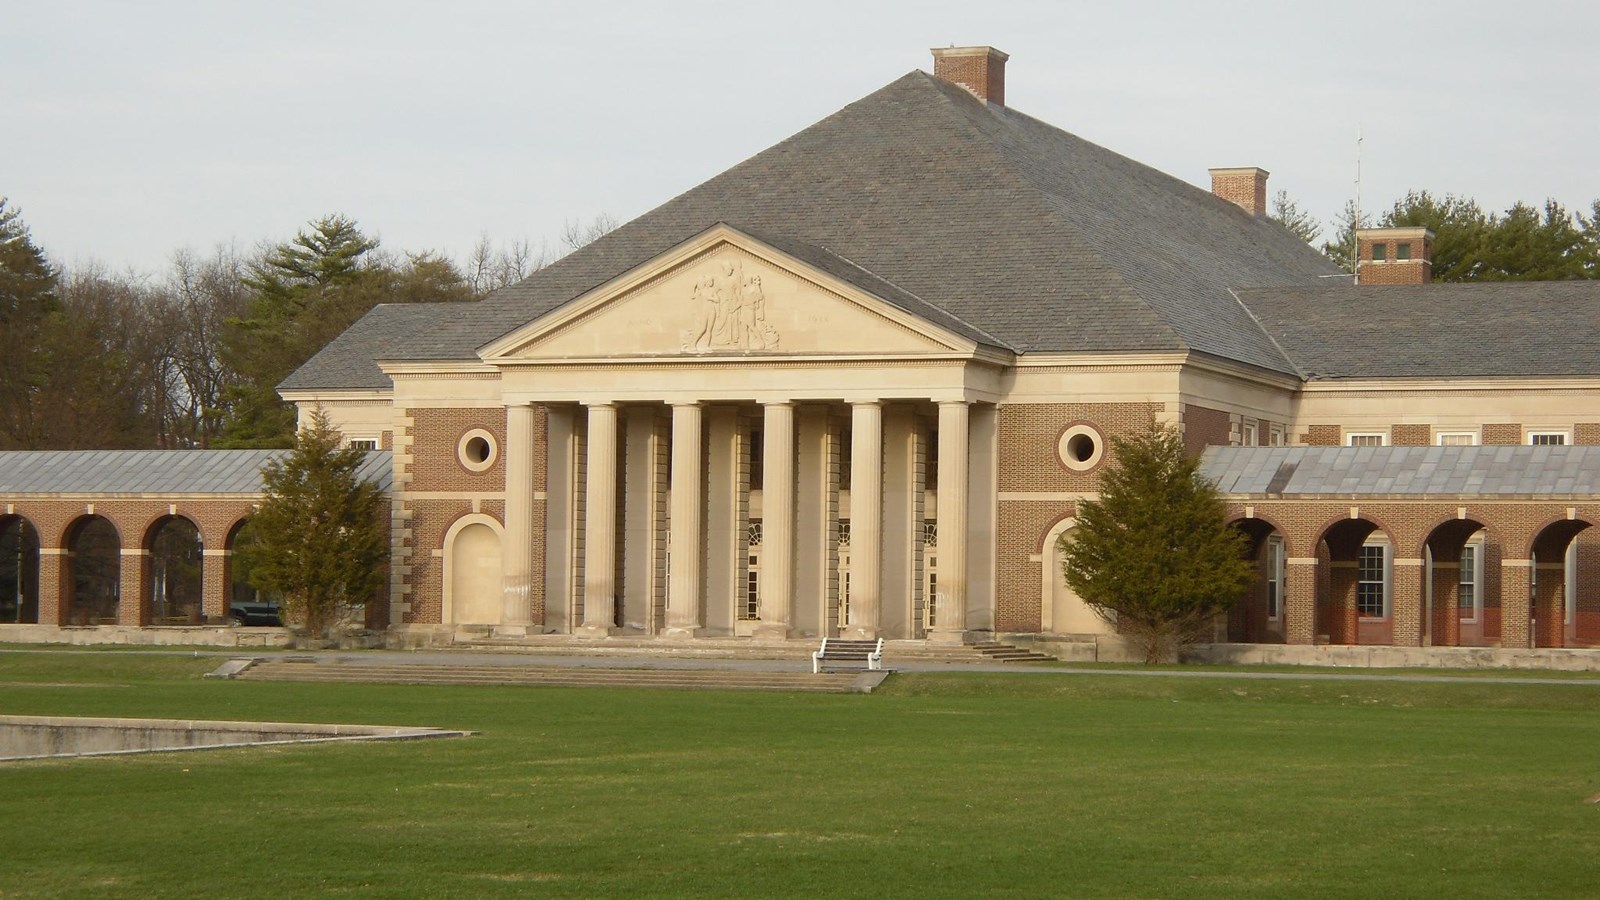 large stately building with a portico in front and wings to the side